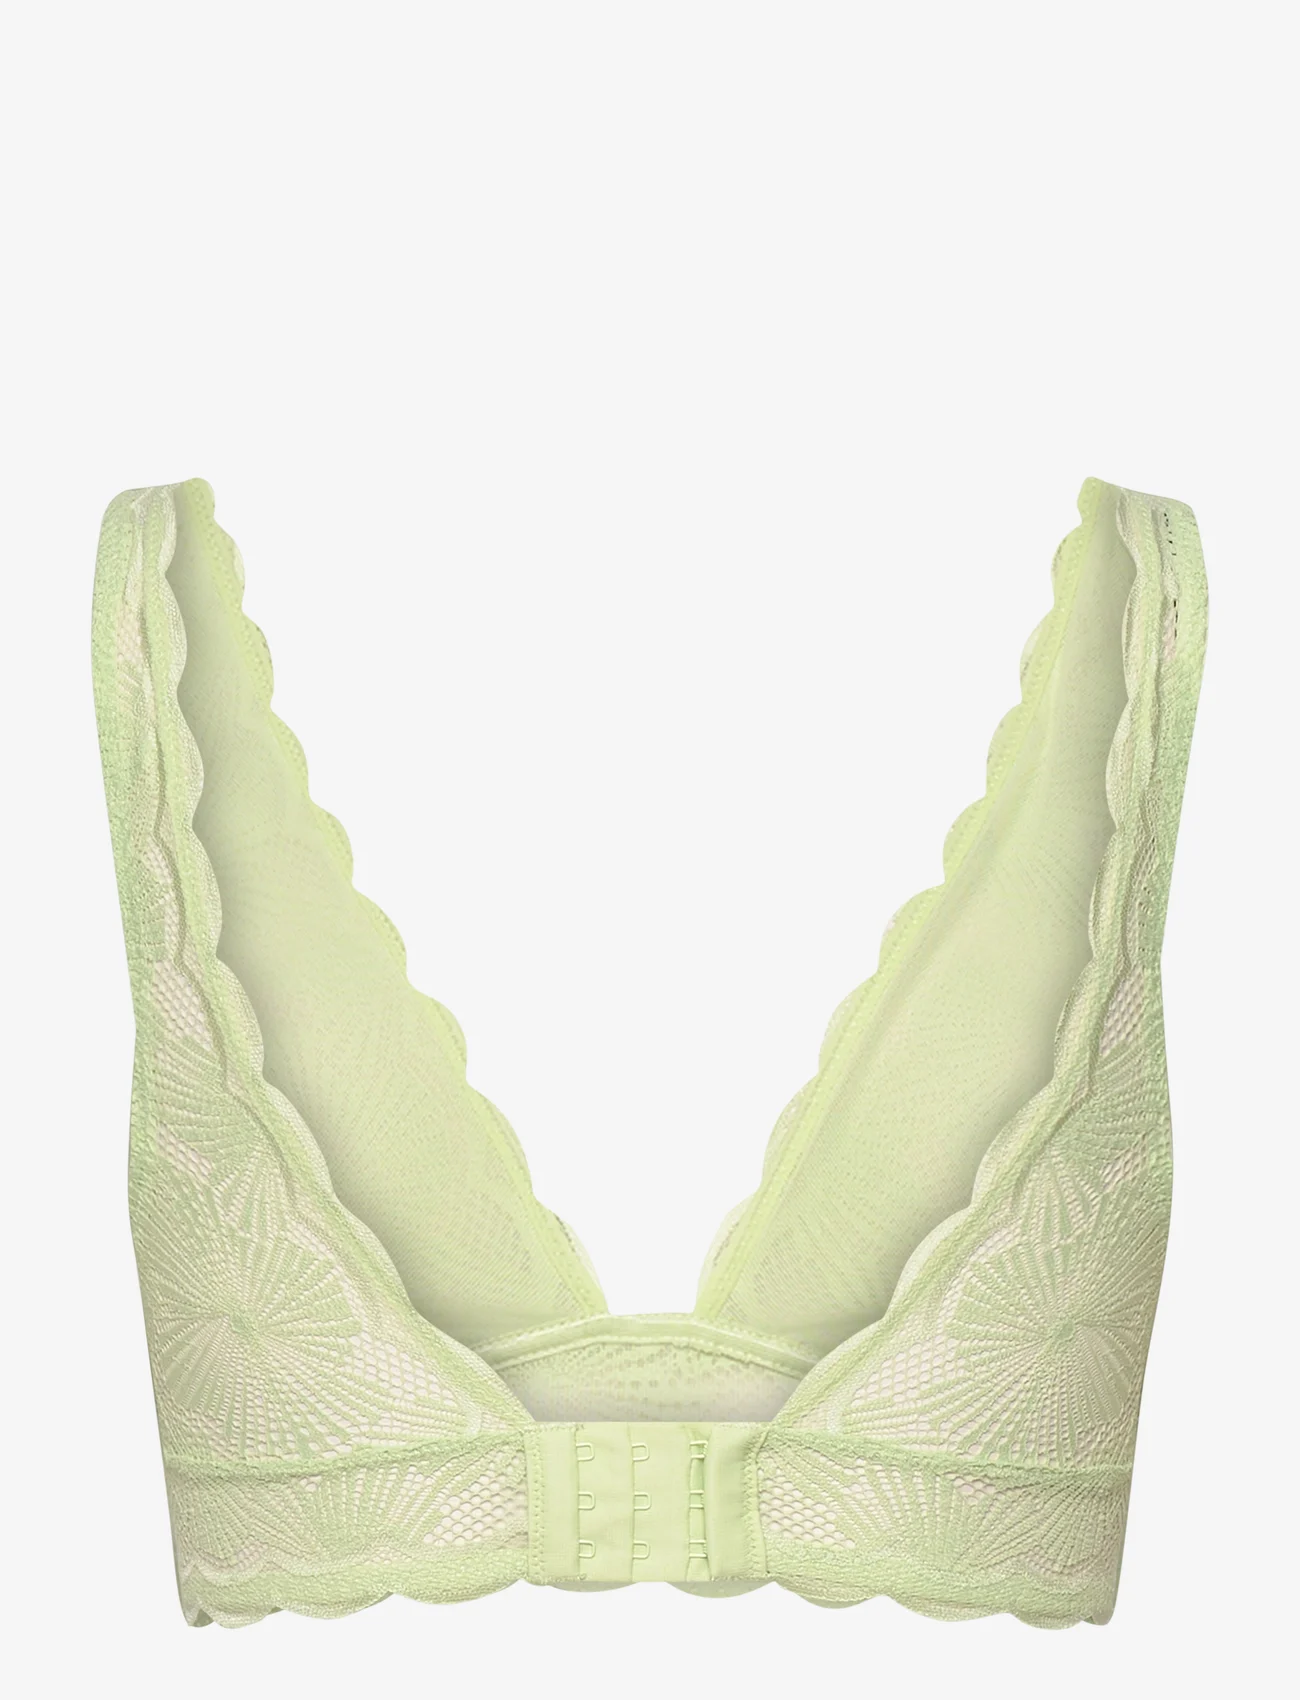 Esprit Bodywear Women - Non-padded, non-wired bra made of patterned lace - bralette - light green - 1